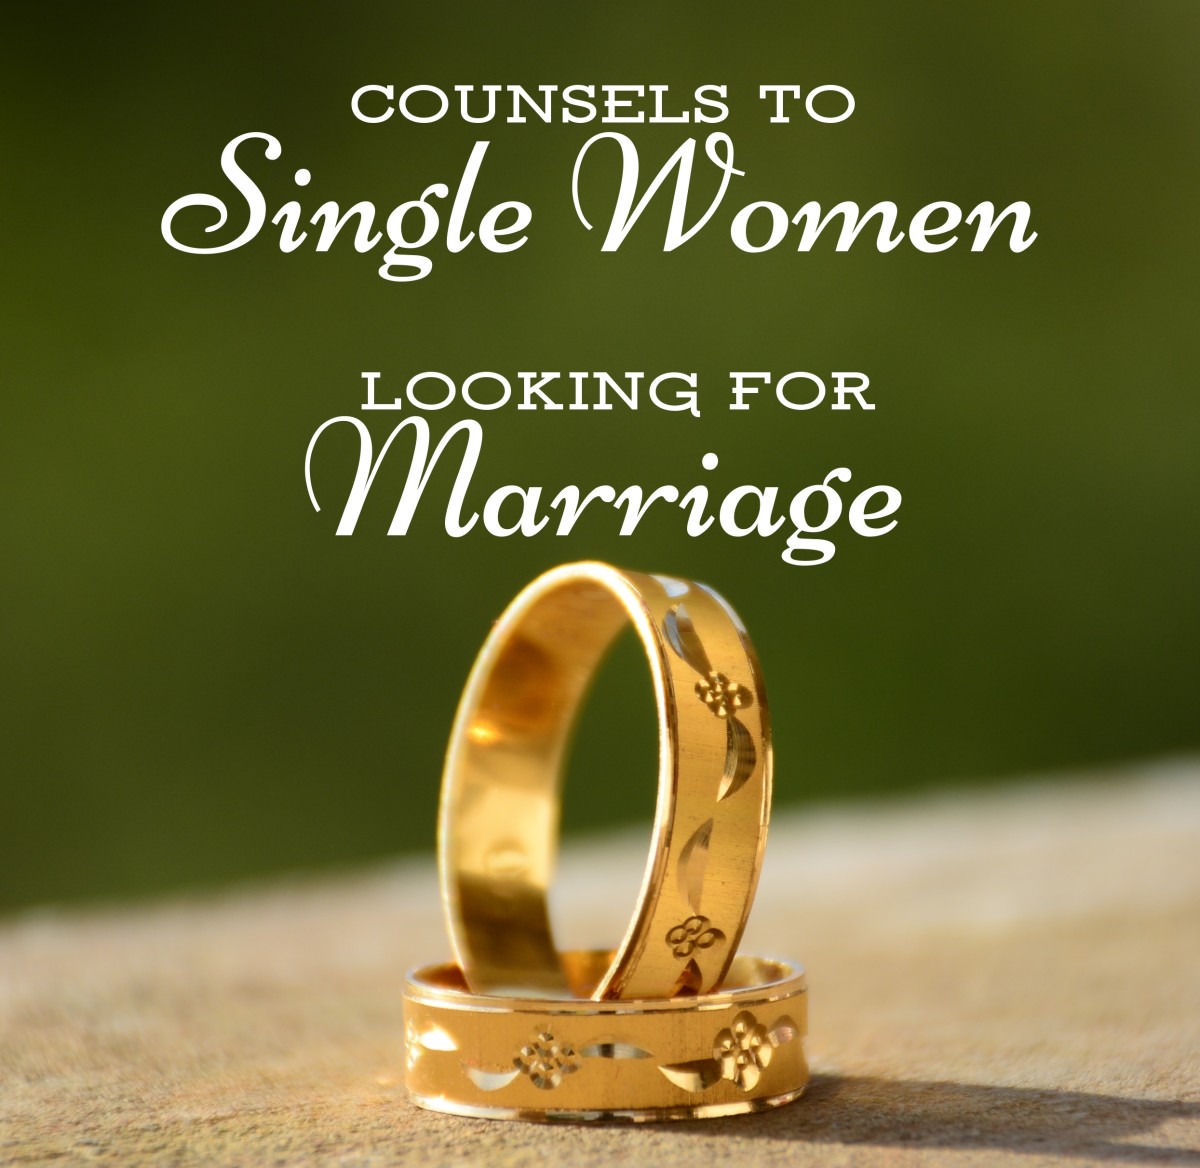 Counsels to Single Women Looking for Marriage